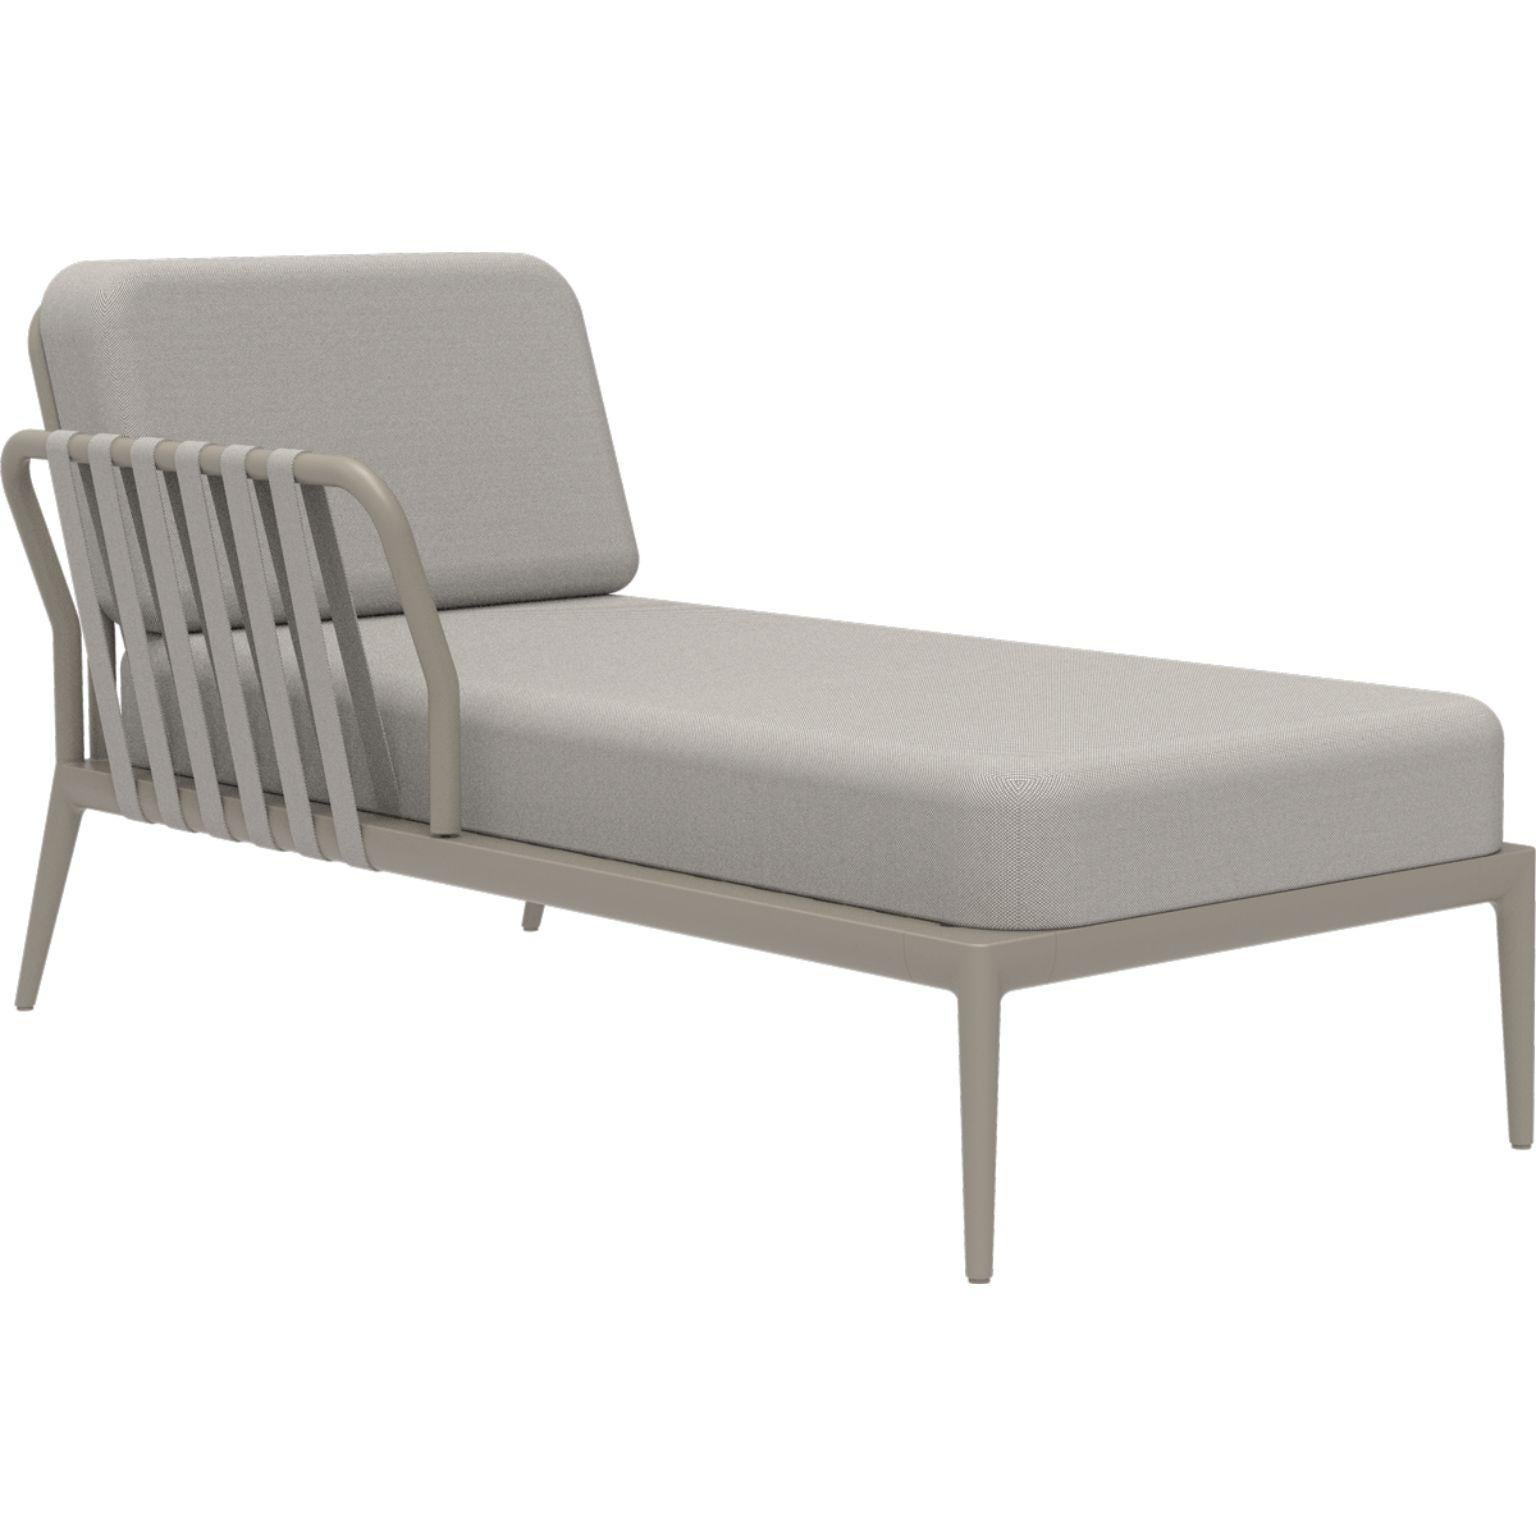 Ribbons cream right chaise longue by MOWEE
Dimensions: D80 x W155 x H81 cm
Material: aluminum, upholstery
Weight: 28 kg
Also available in different colours and finishes.

An unmistakable collection for its beauty and robustness. A tribute to